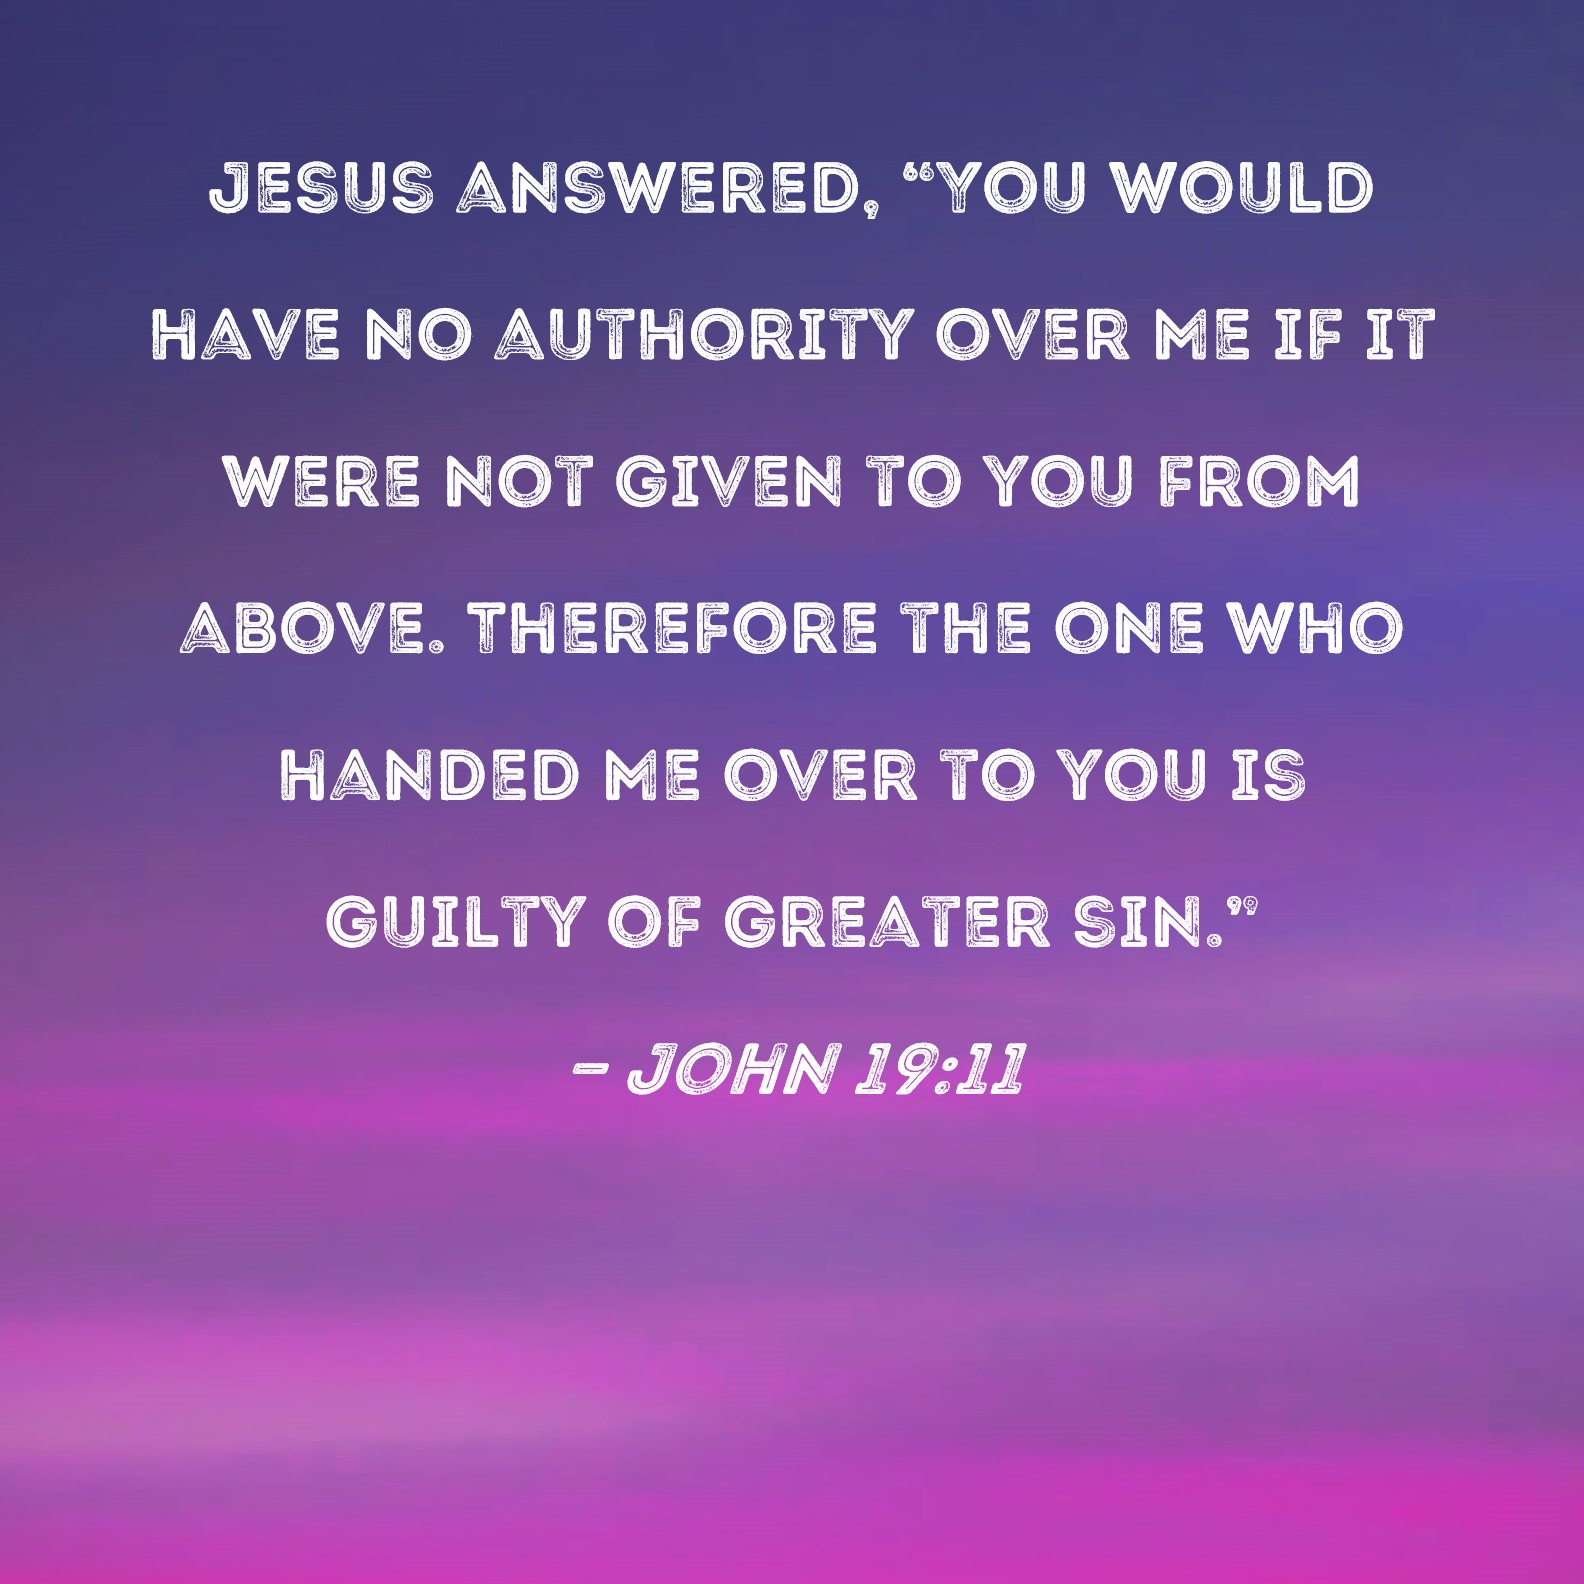 John 1911 Jesus answered, "You would have no authority over Me if it